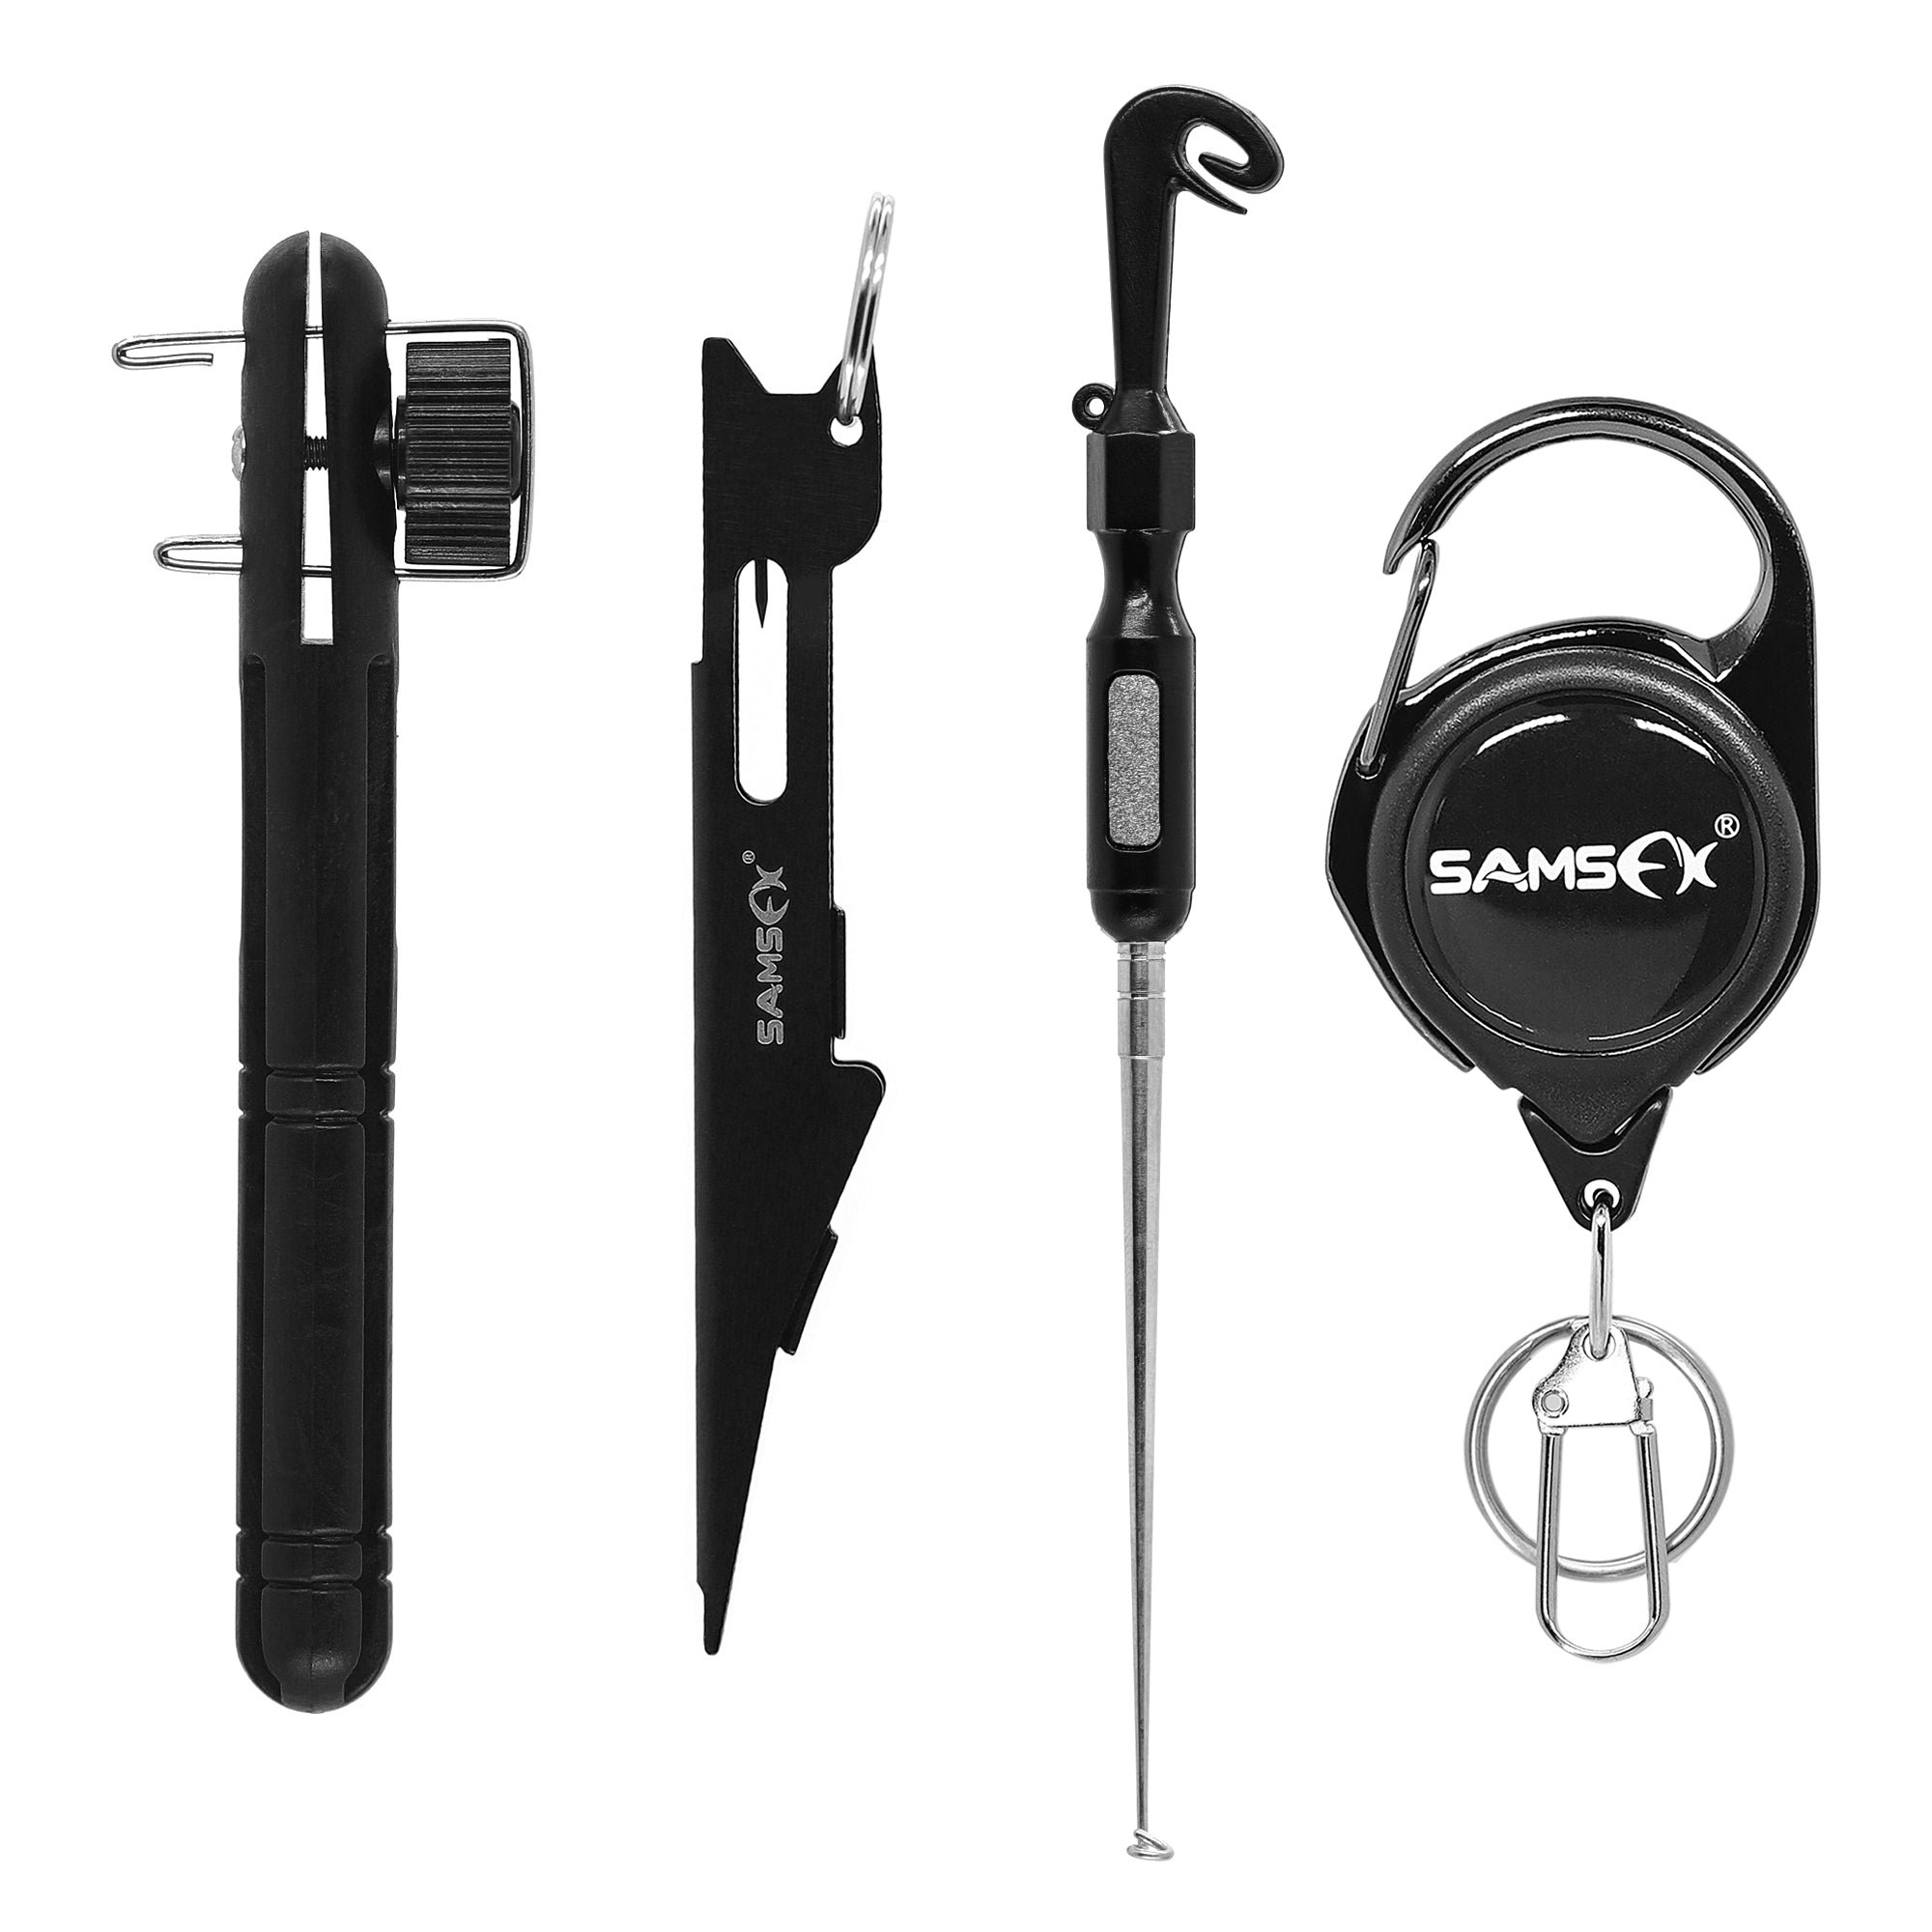  SAMSFX Fishing Tungsten Line Cutter with Zinger Retractors,  Fishing Pliers Cutters, Knot Tying Tool, Hook Eye Cleaner, Hook Sharpener,  Tune Baits & Loop Tyer Tool (Gray Line Cutter with Retractor) 